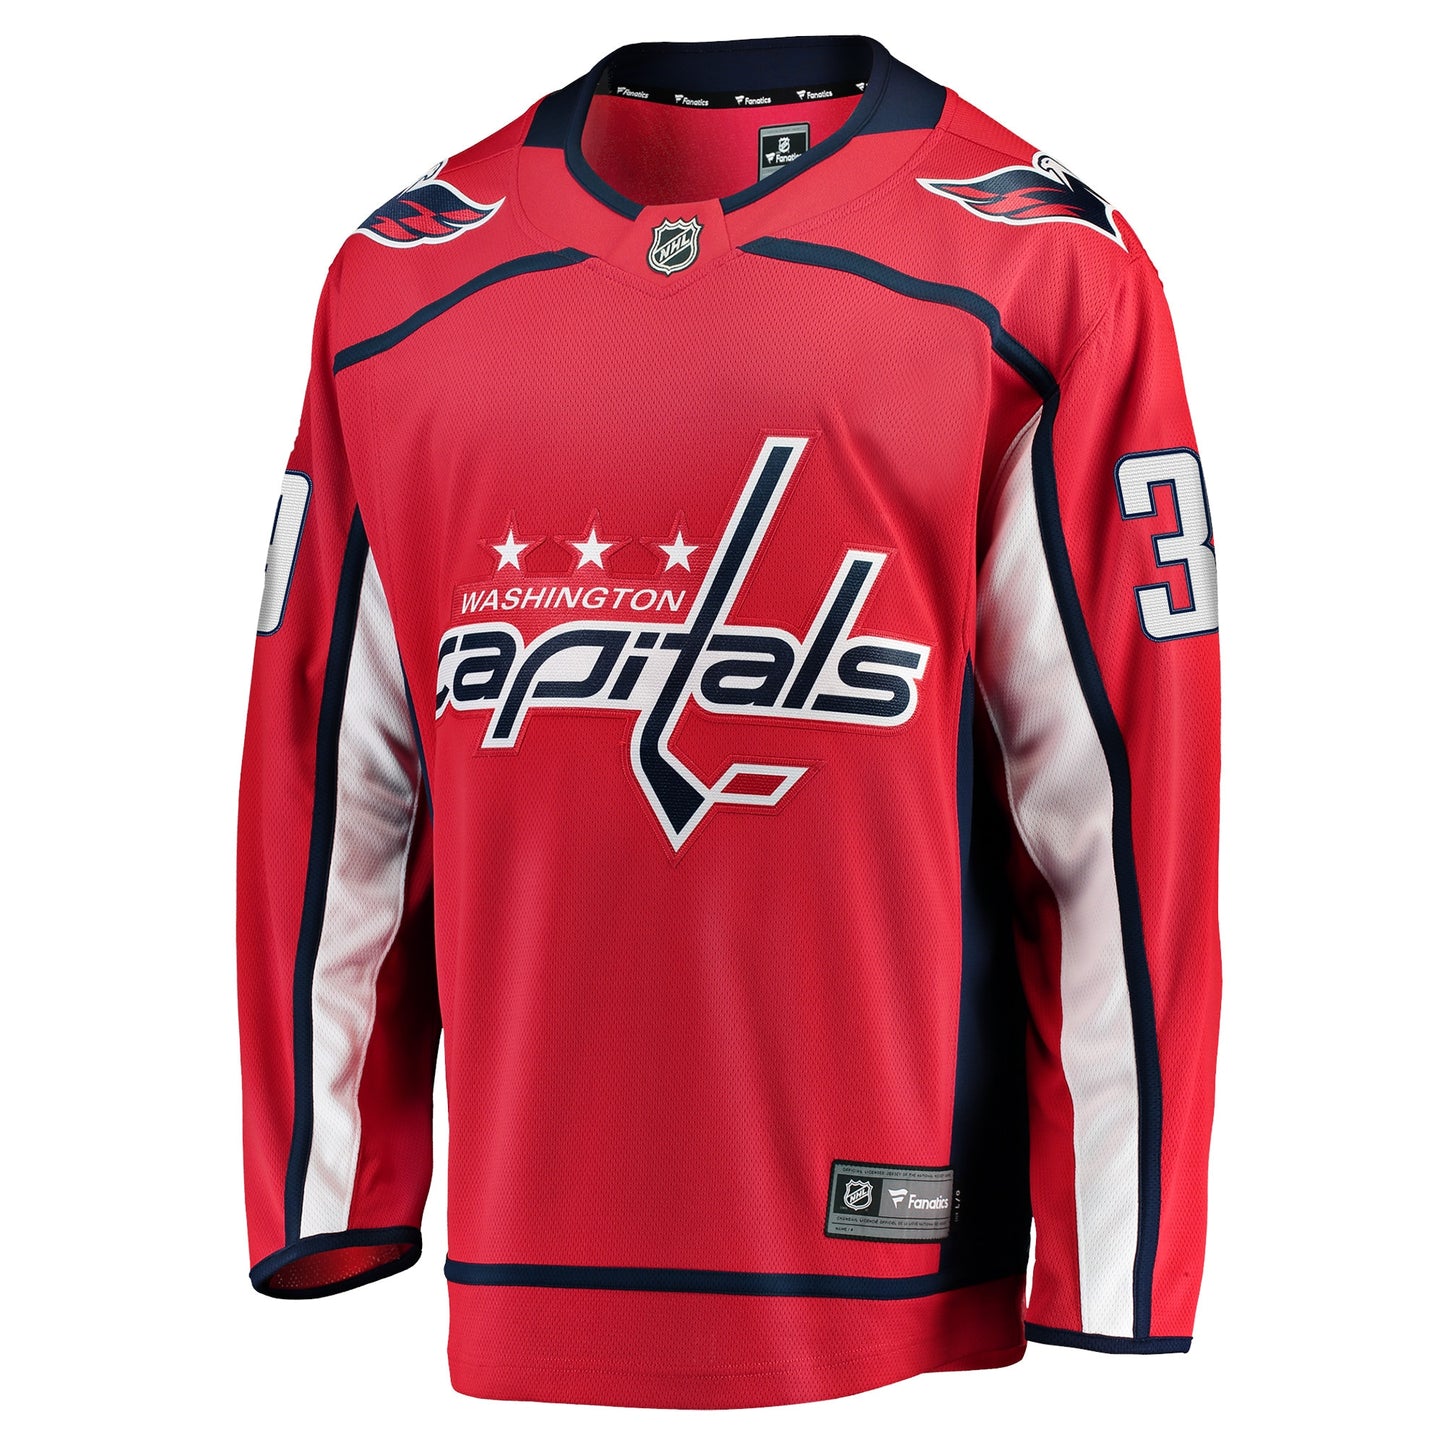 Anthony Mantha Washington Capitals Fanatics Branded Home Premier Breakaway Player Jersey - Red